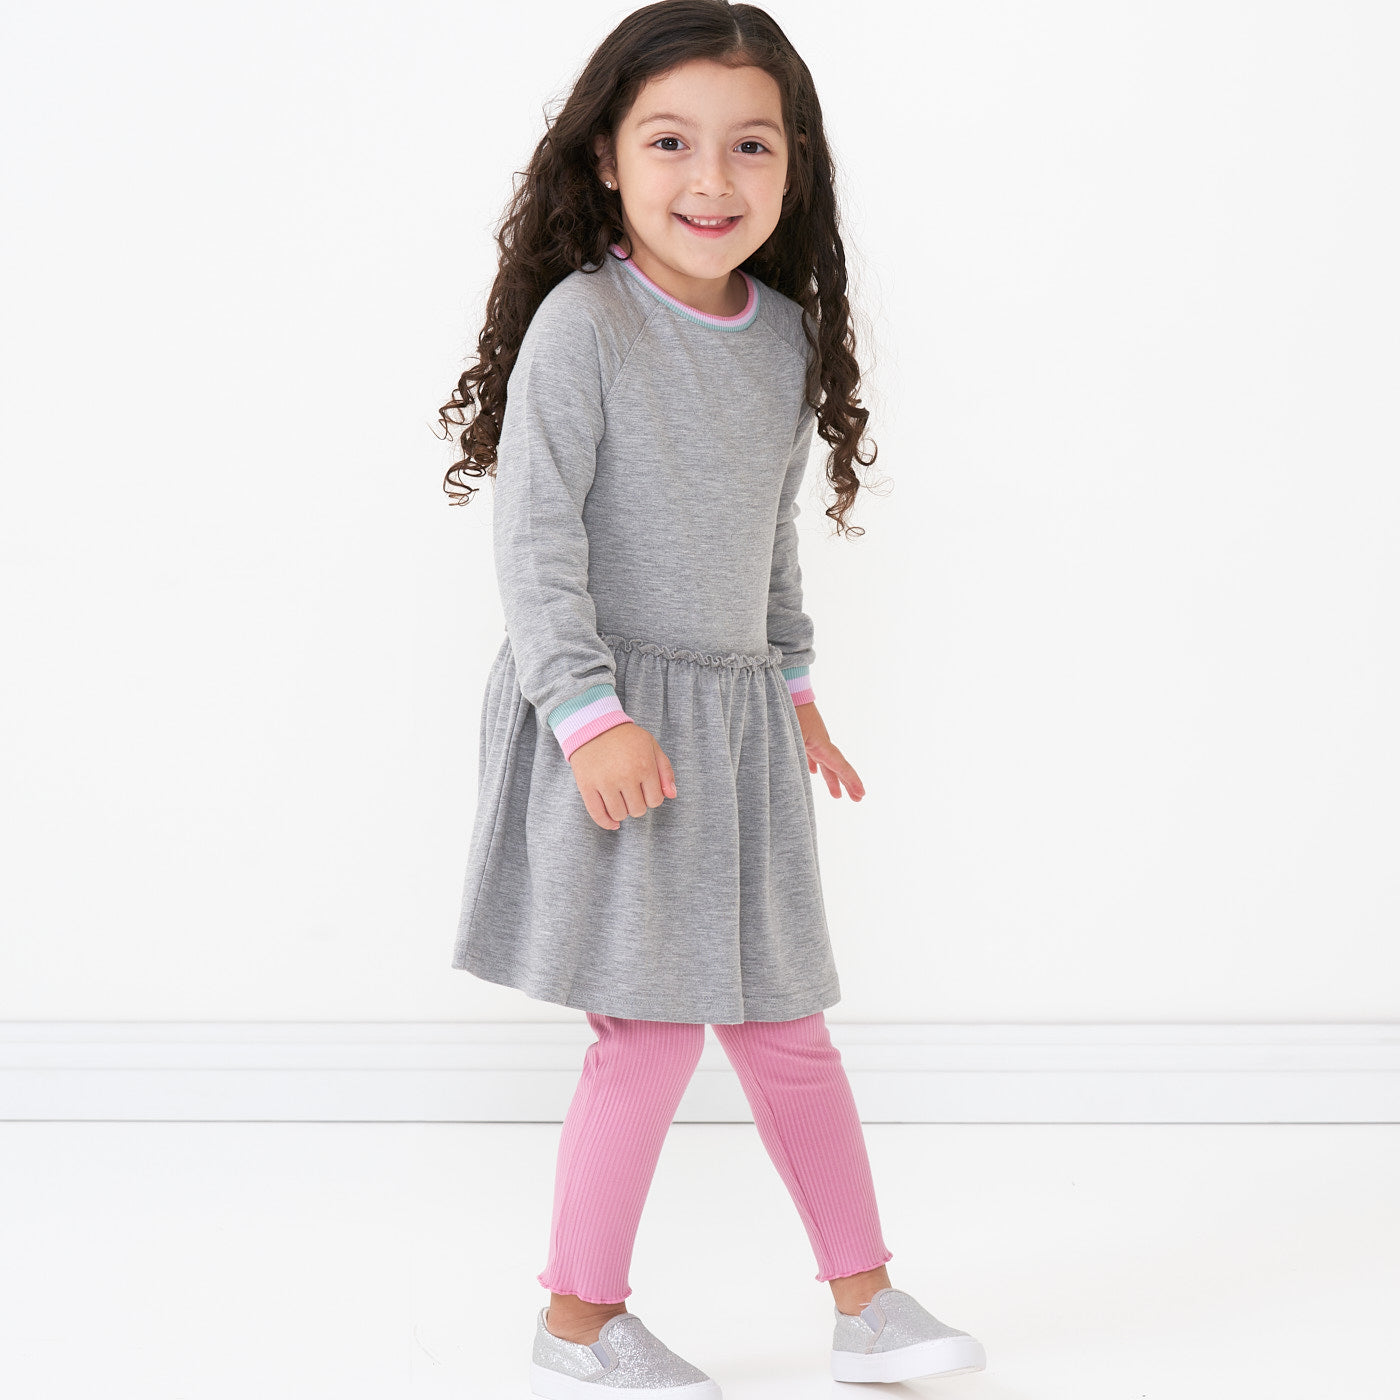 Child posing wearing a Heather Gray drop waist dress paired with Garden Rose ribbed lettuce leggings